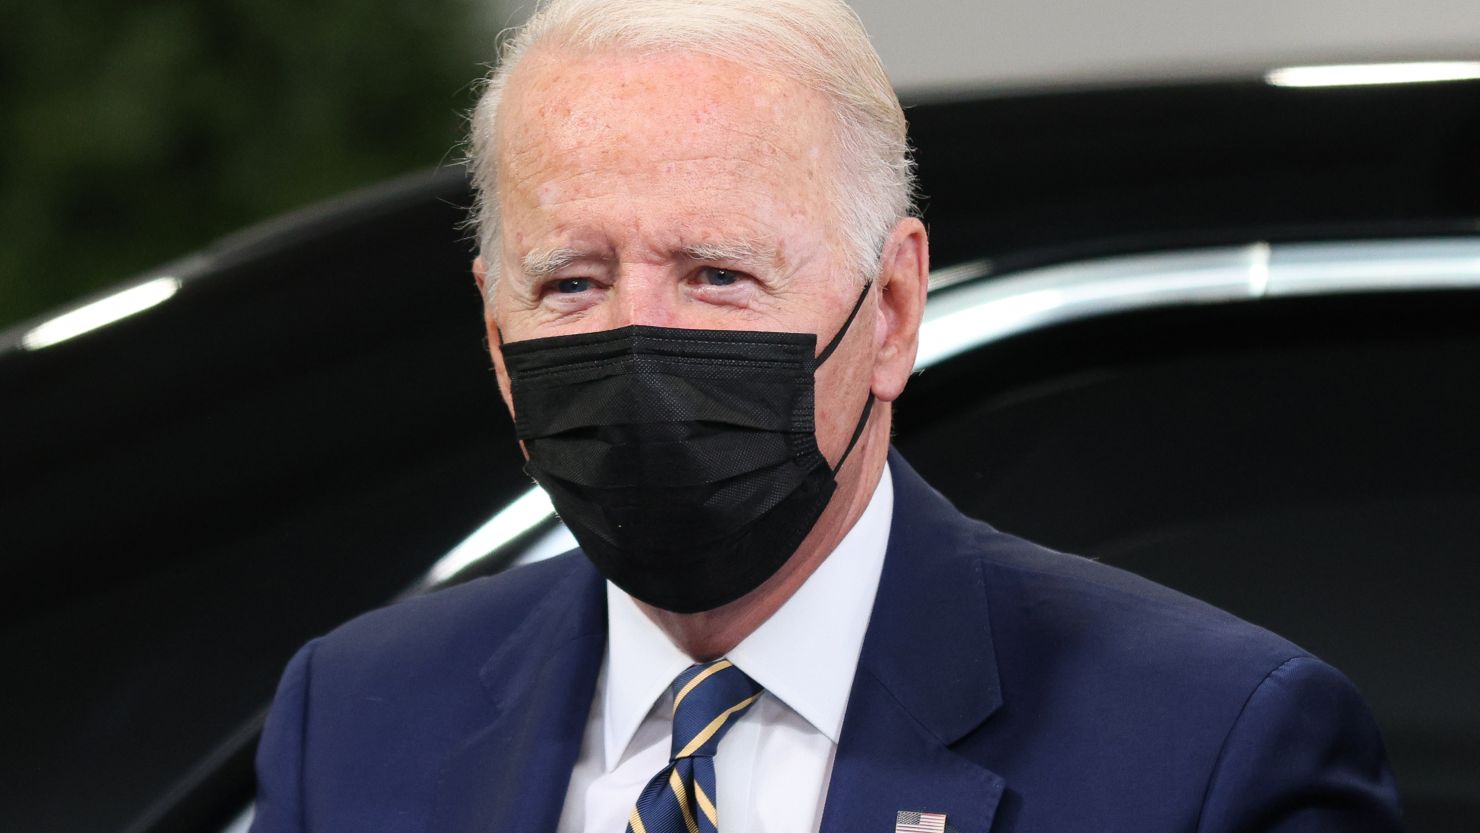 President Joe Biden wears a face mask as he arrives for the COP26 UN Climate Summit on November 1, 2021, in Glasgow, United Kingdom.